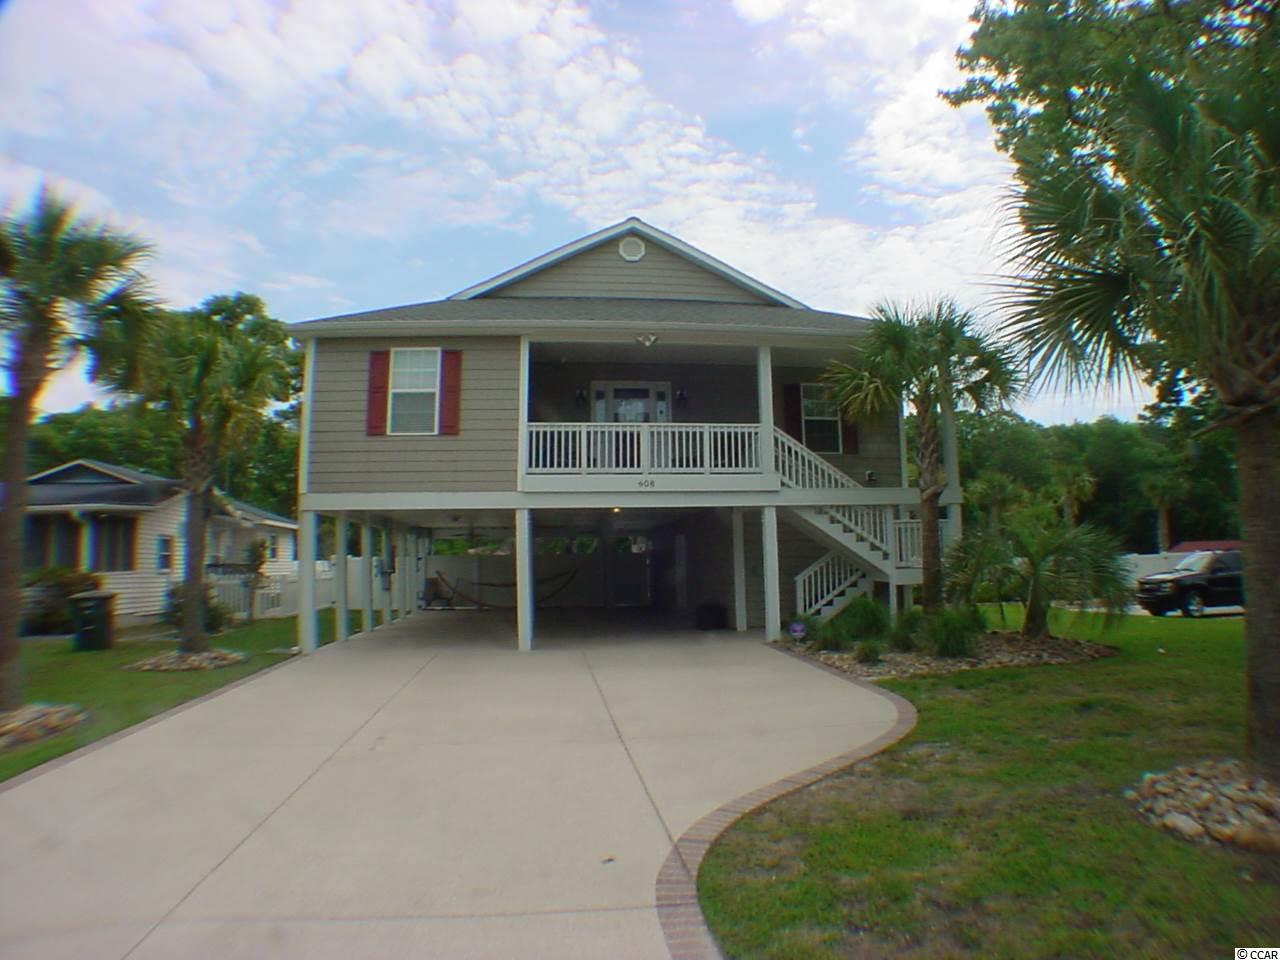 608 S 33rd Ave. N North Myrtle Beach, SC 29582